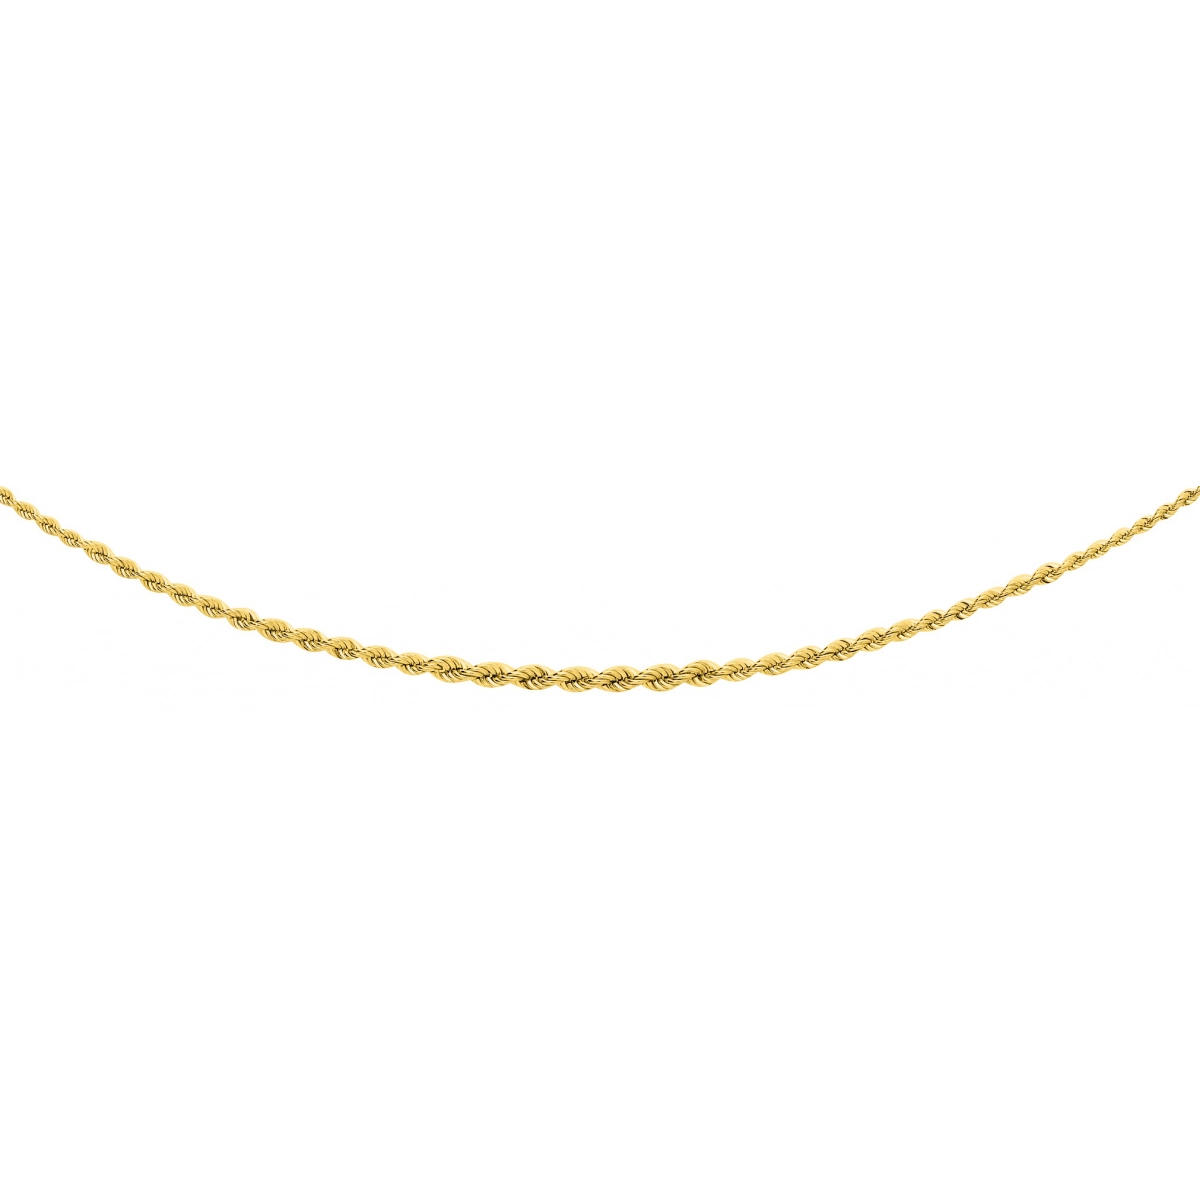 Necklace 'rope chain' grad 18K YG Lua Blanca  M287 - Size 42